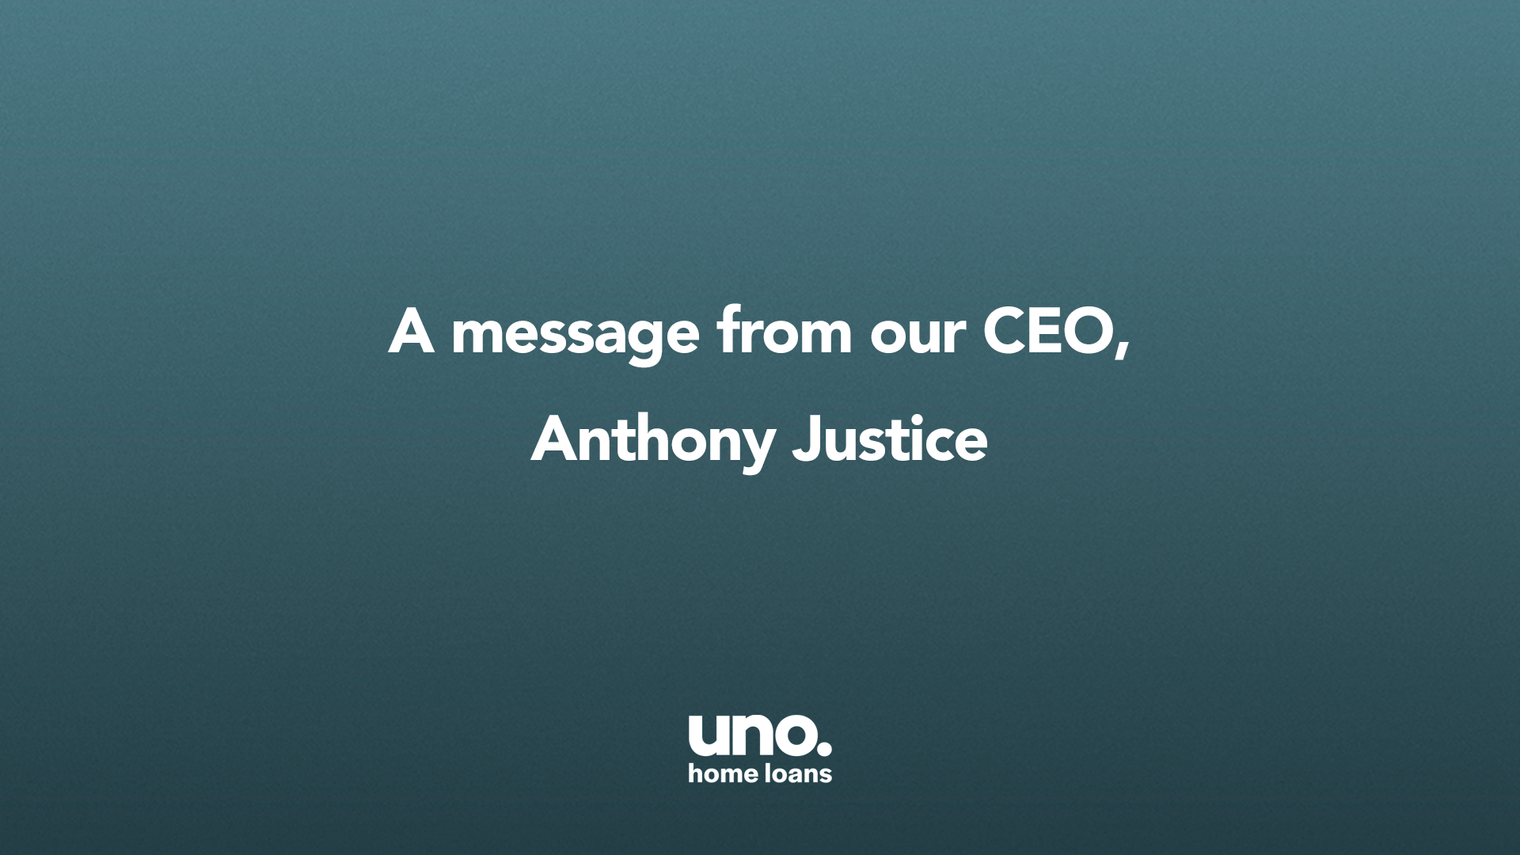 A message from our CEO, Anthony Justice